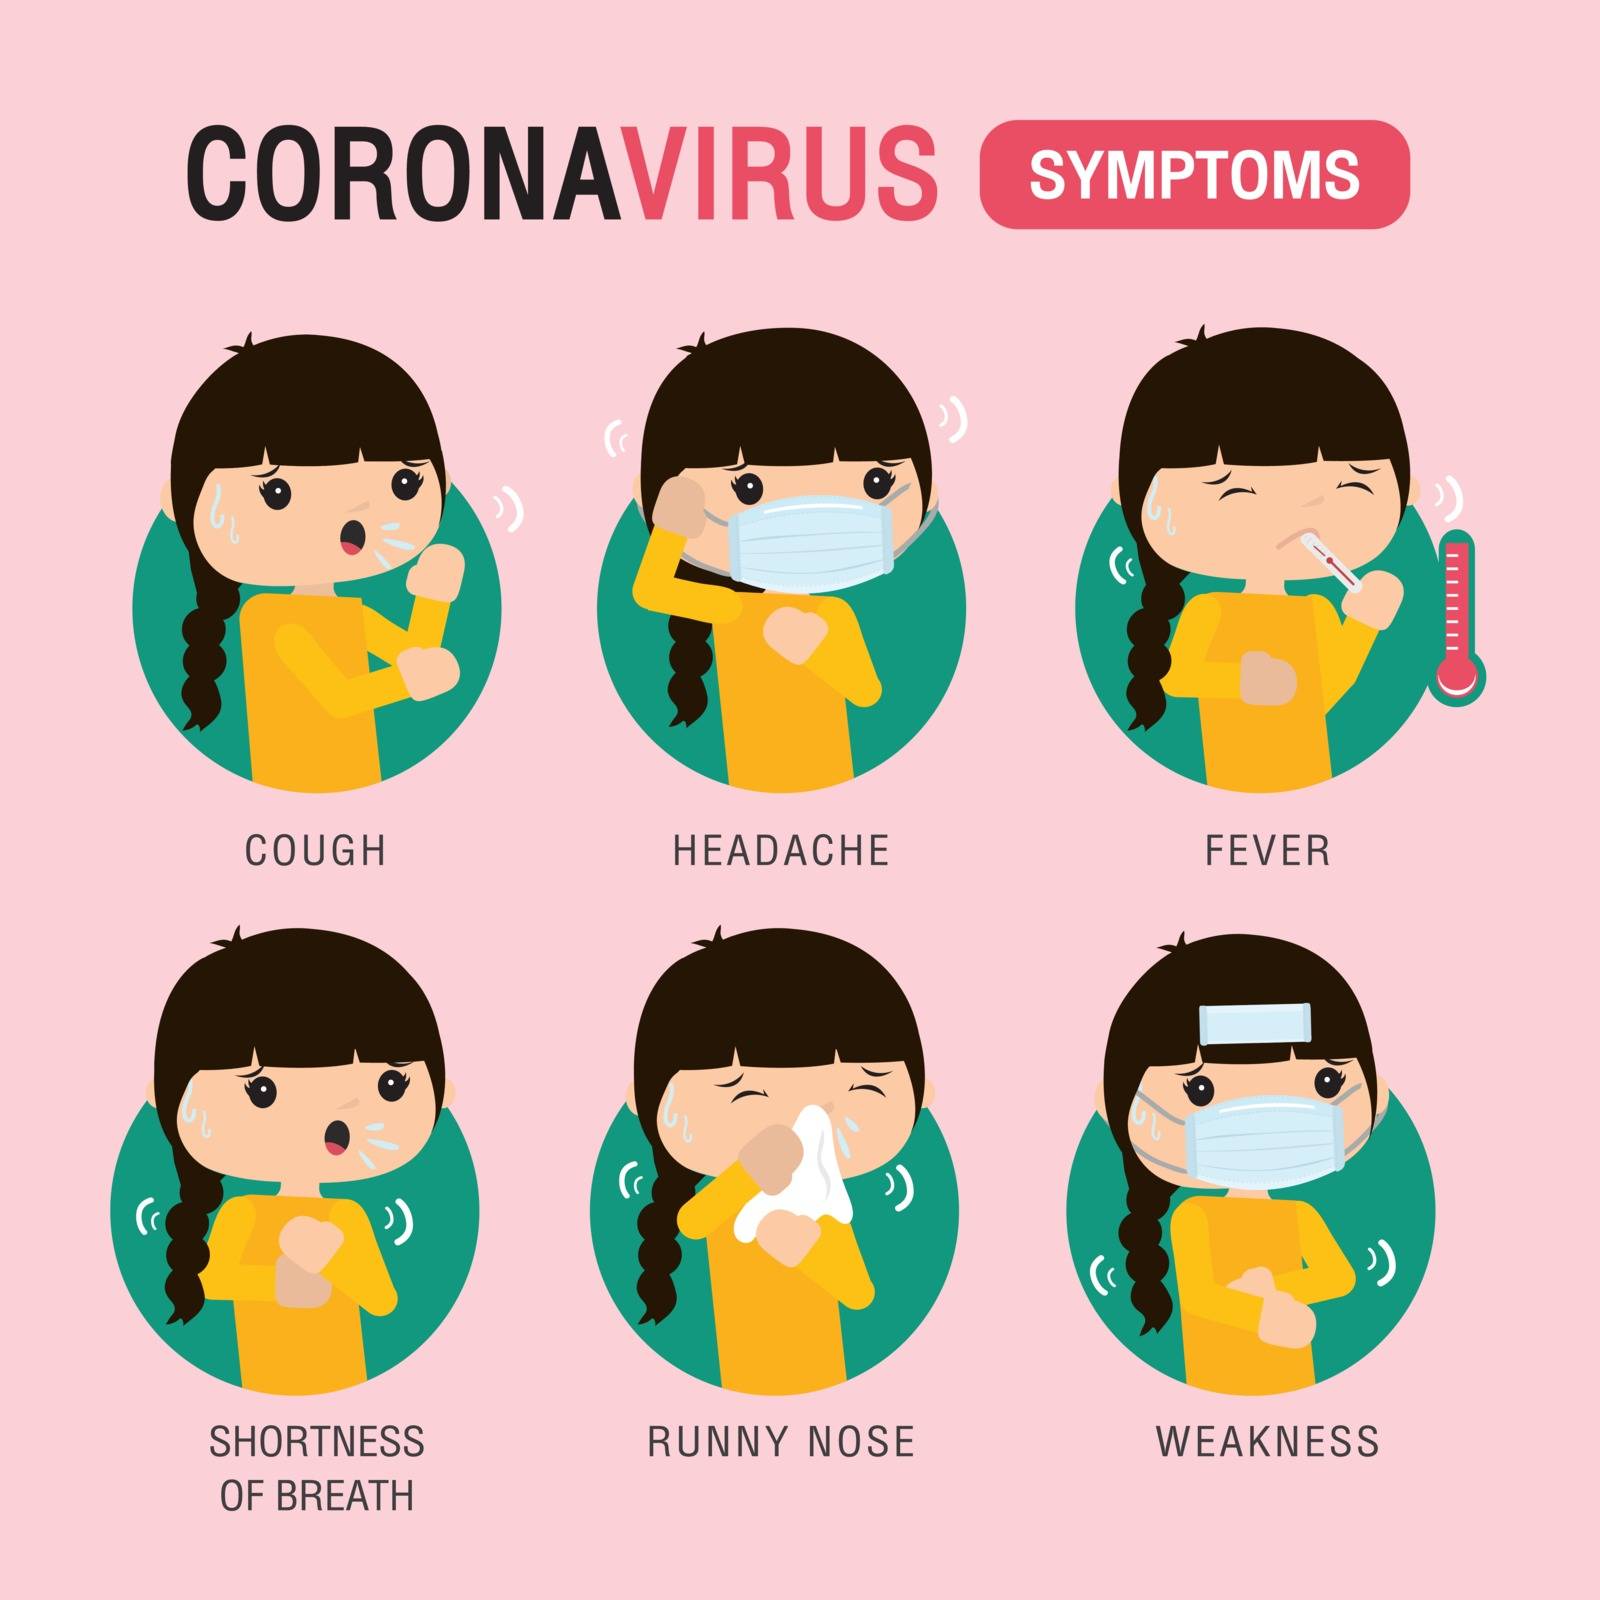 Corona virus 2019 Symptoms and Prevention Infographic. 2019-nCOV The Patient Character Cartoon Vector. Wuhan Virus Disease.